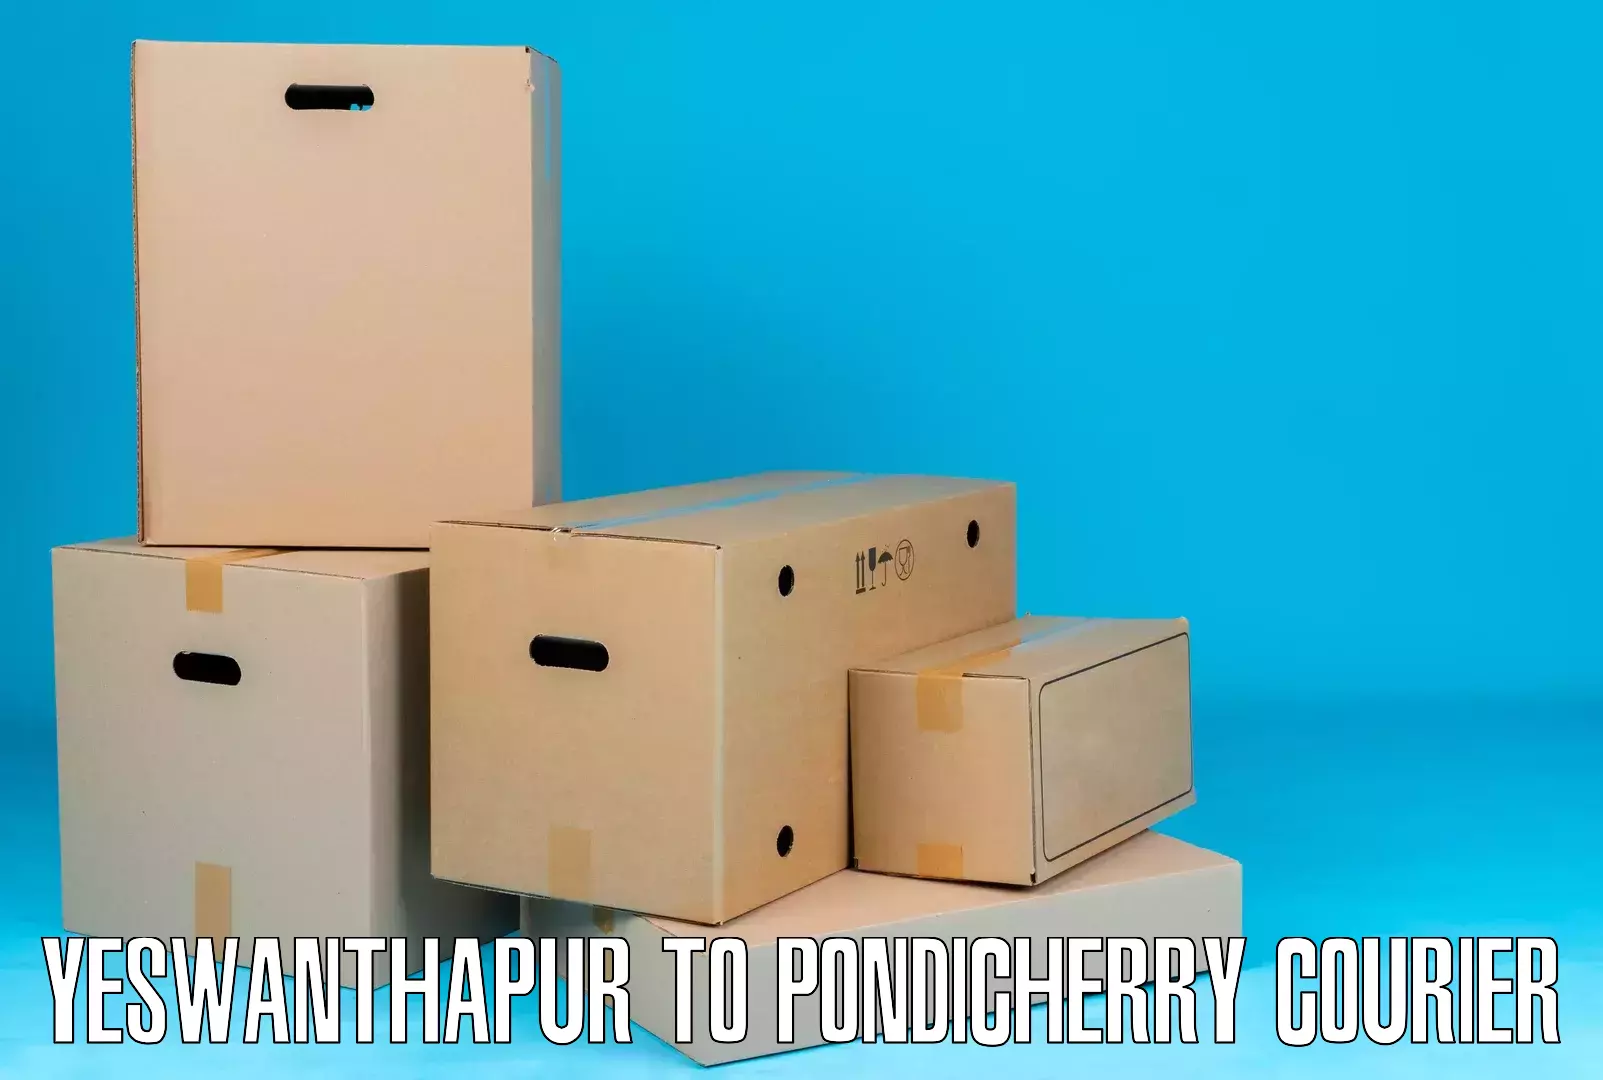 Easy access courier services Yeswanthapur to Sri Balaji Vidyapeeth Mahatma Gandhi Medical College Campus Puducherry